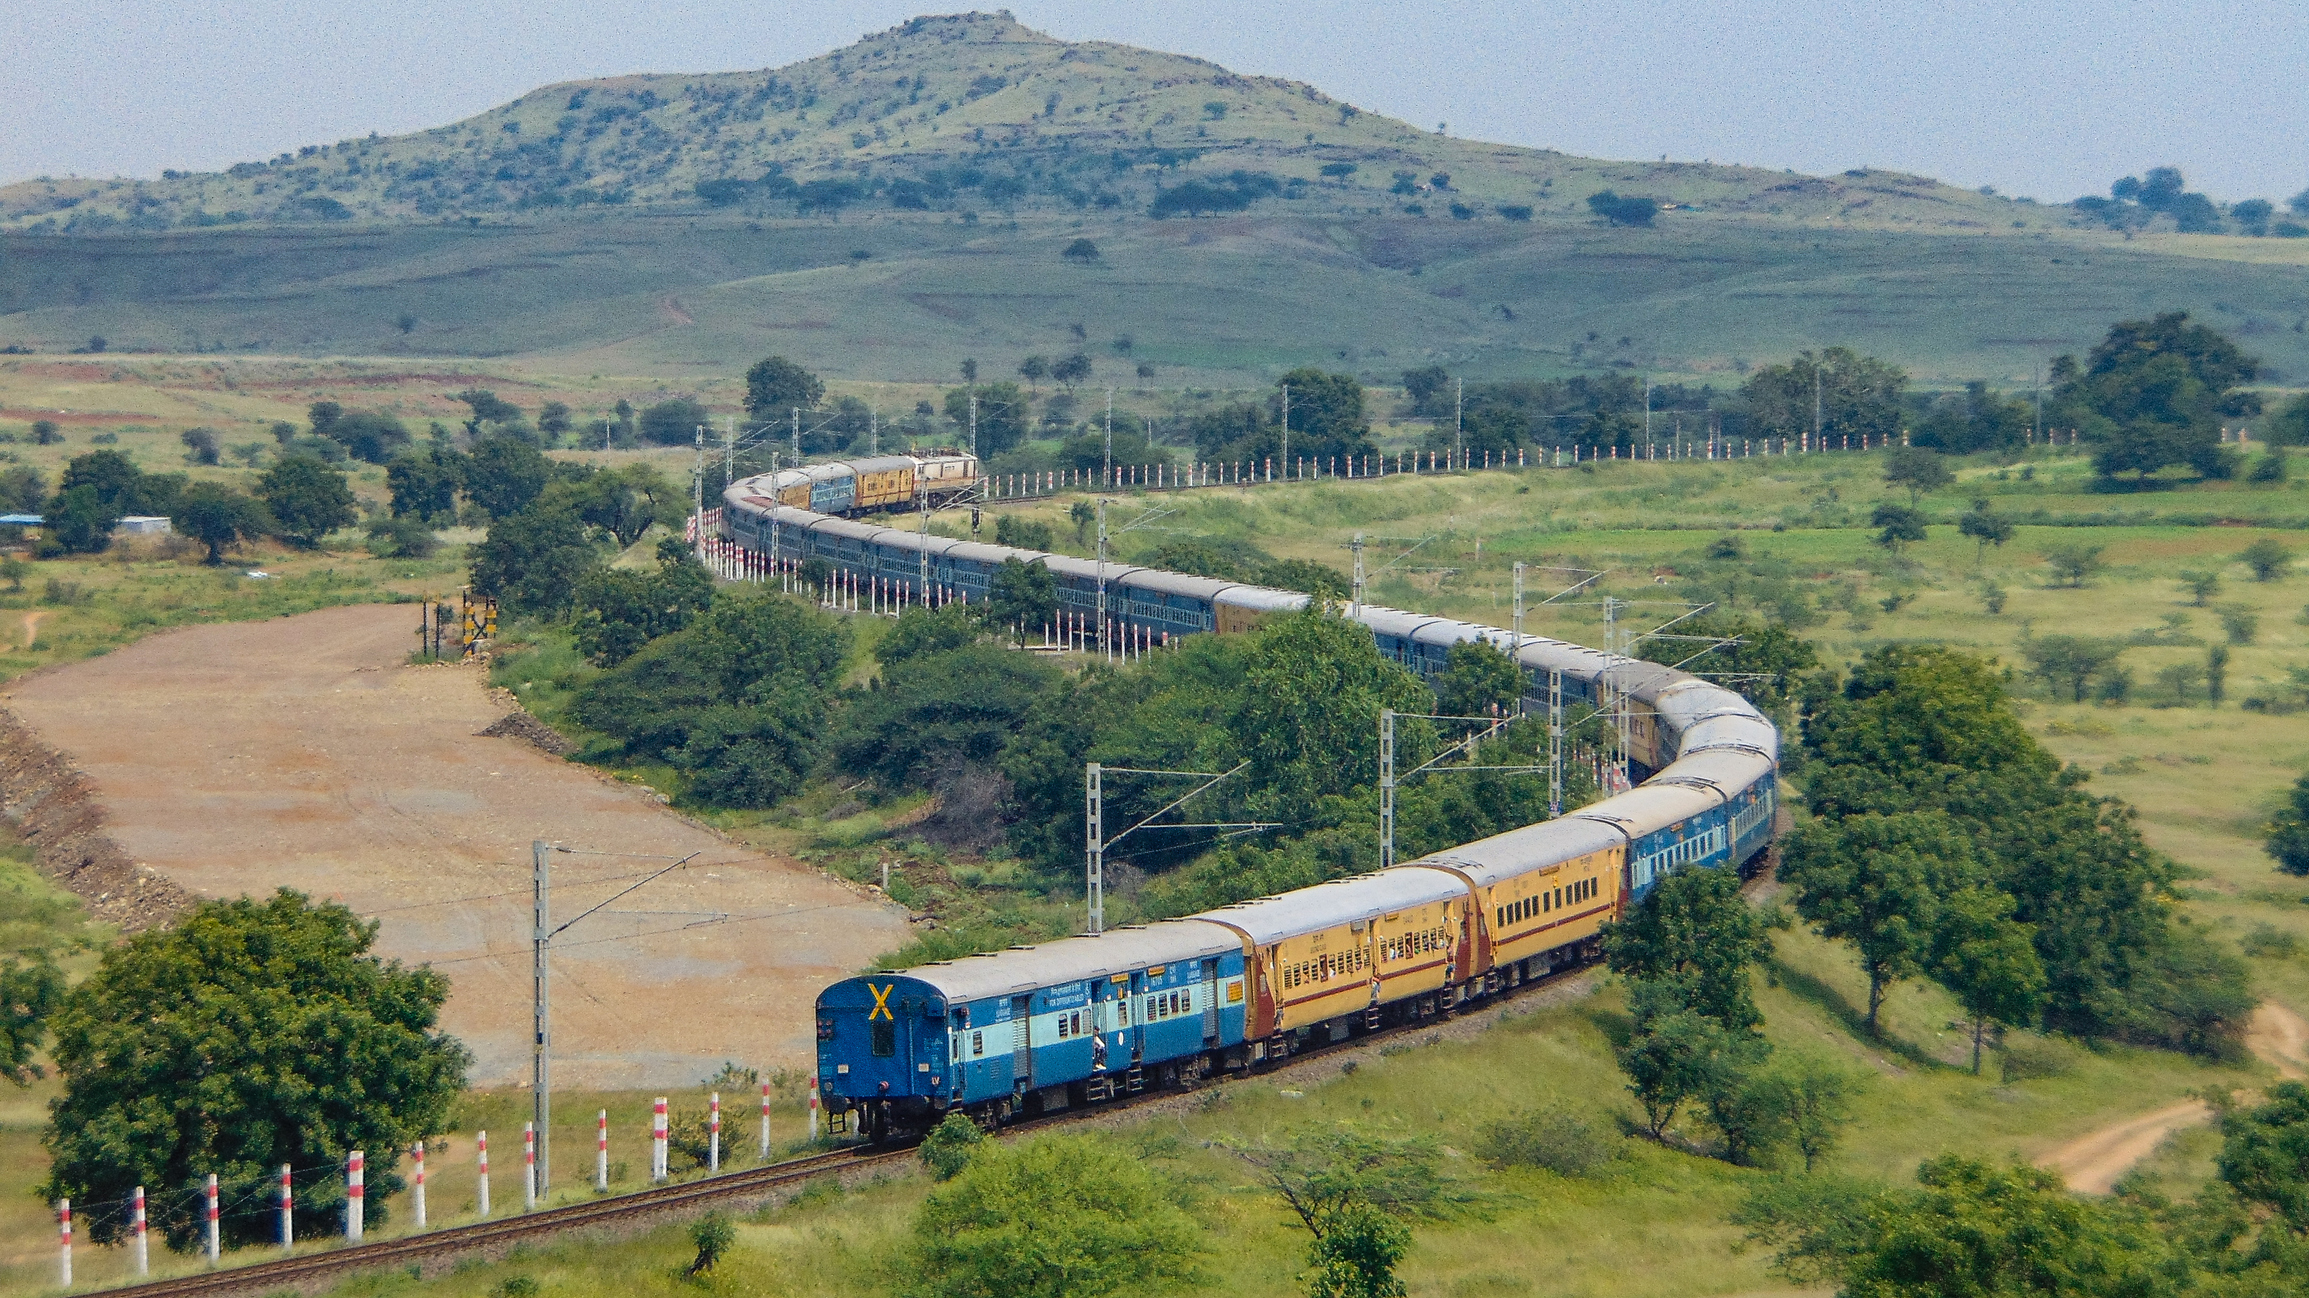 Express train in India